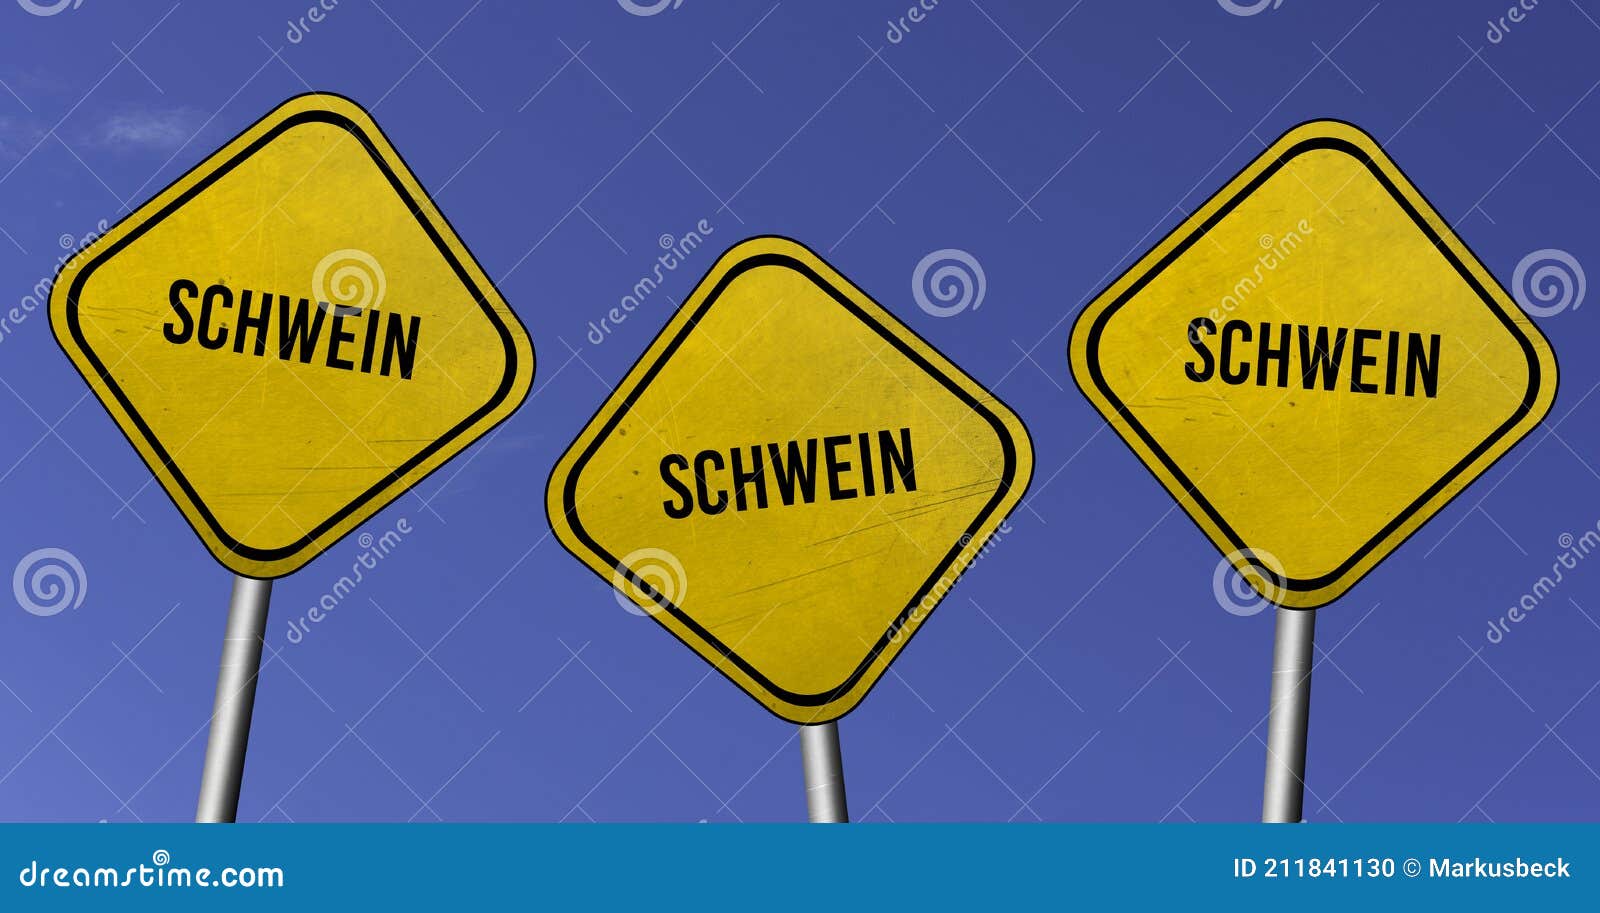 schwein - three yellow signs with blue sky background